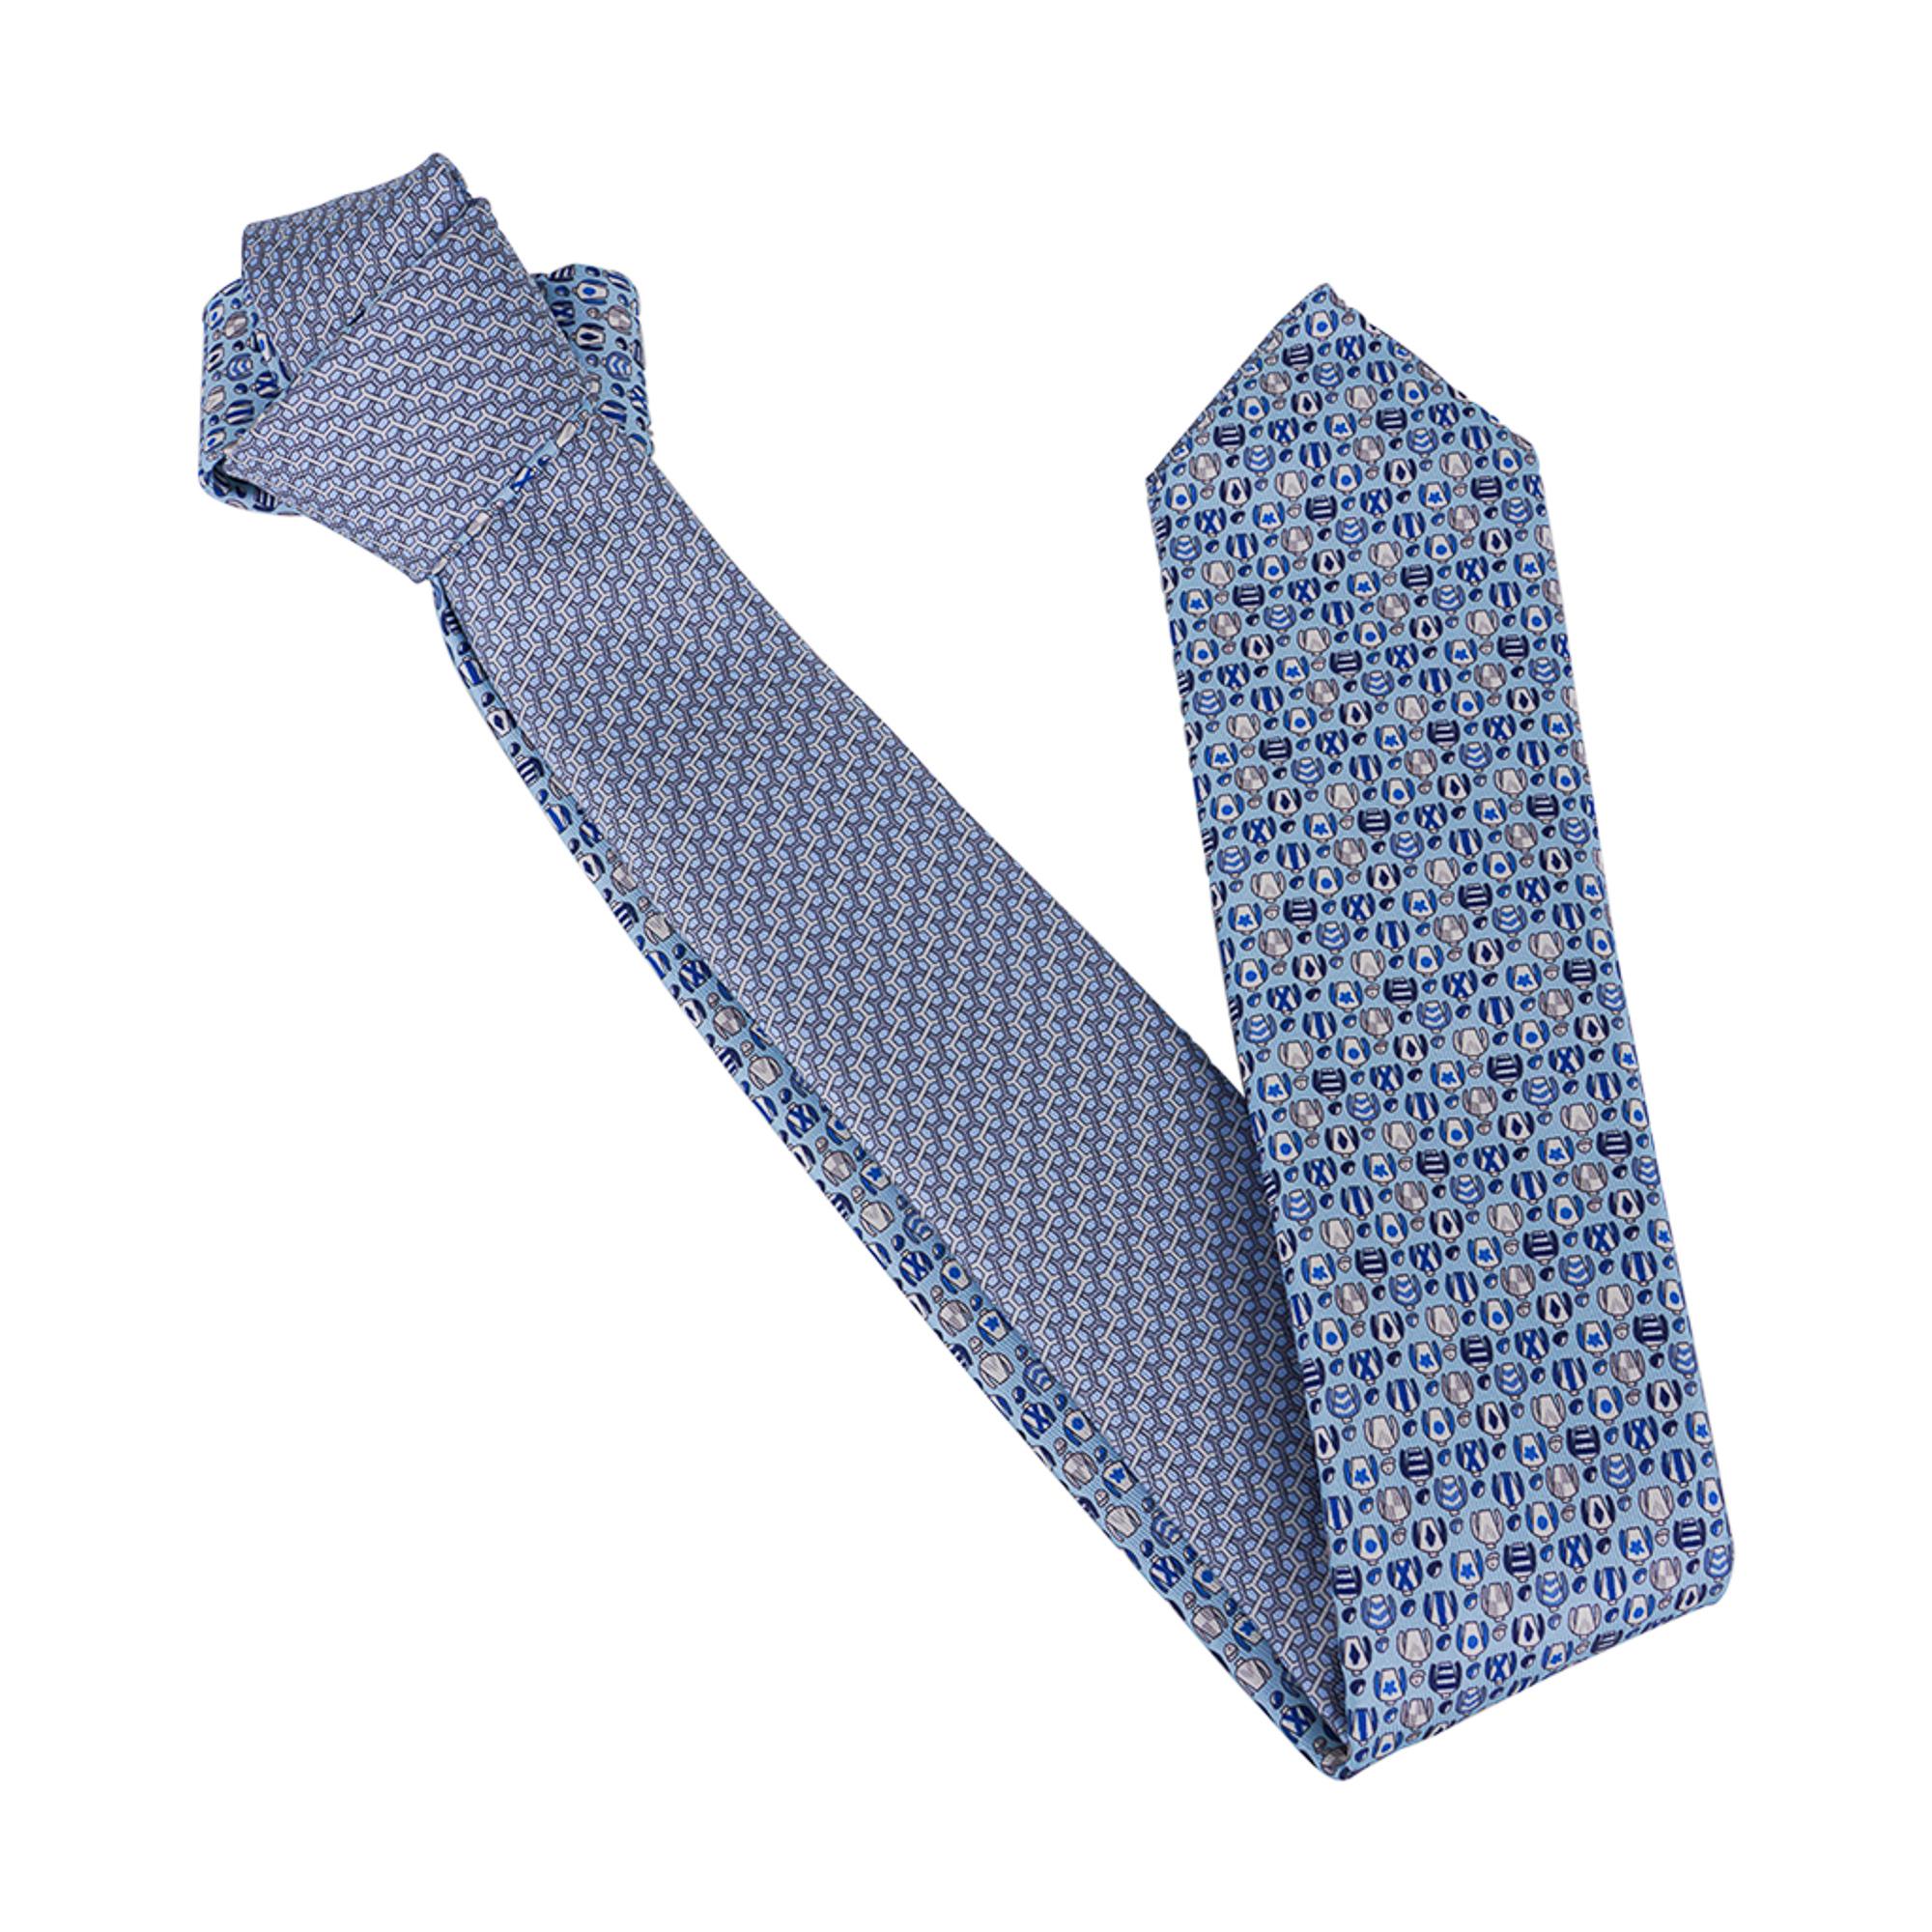 Mightychic offers an Hermes Double 6 Imprimee silk twillbi tie.
Ciel and Marine colorway.
A double tie with 2 different designs, one is classic and the other fancy.
Can be worn either way according to one's mood!
NEW or NEVER WORN.
Comes with